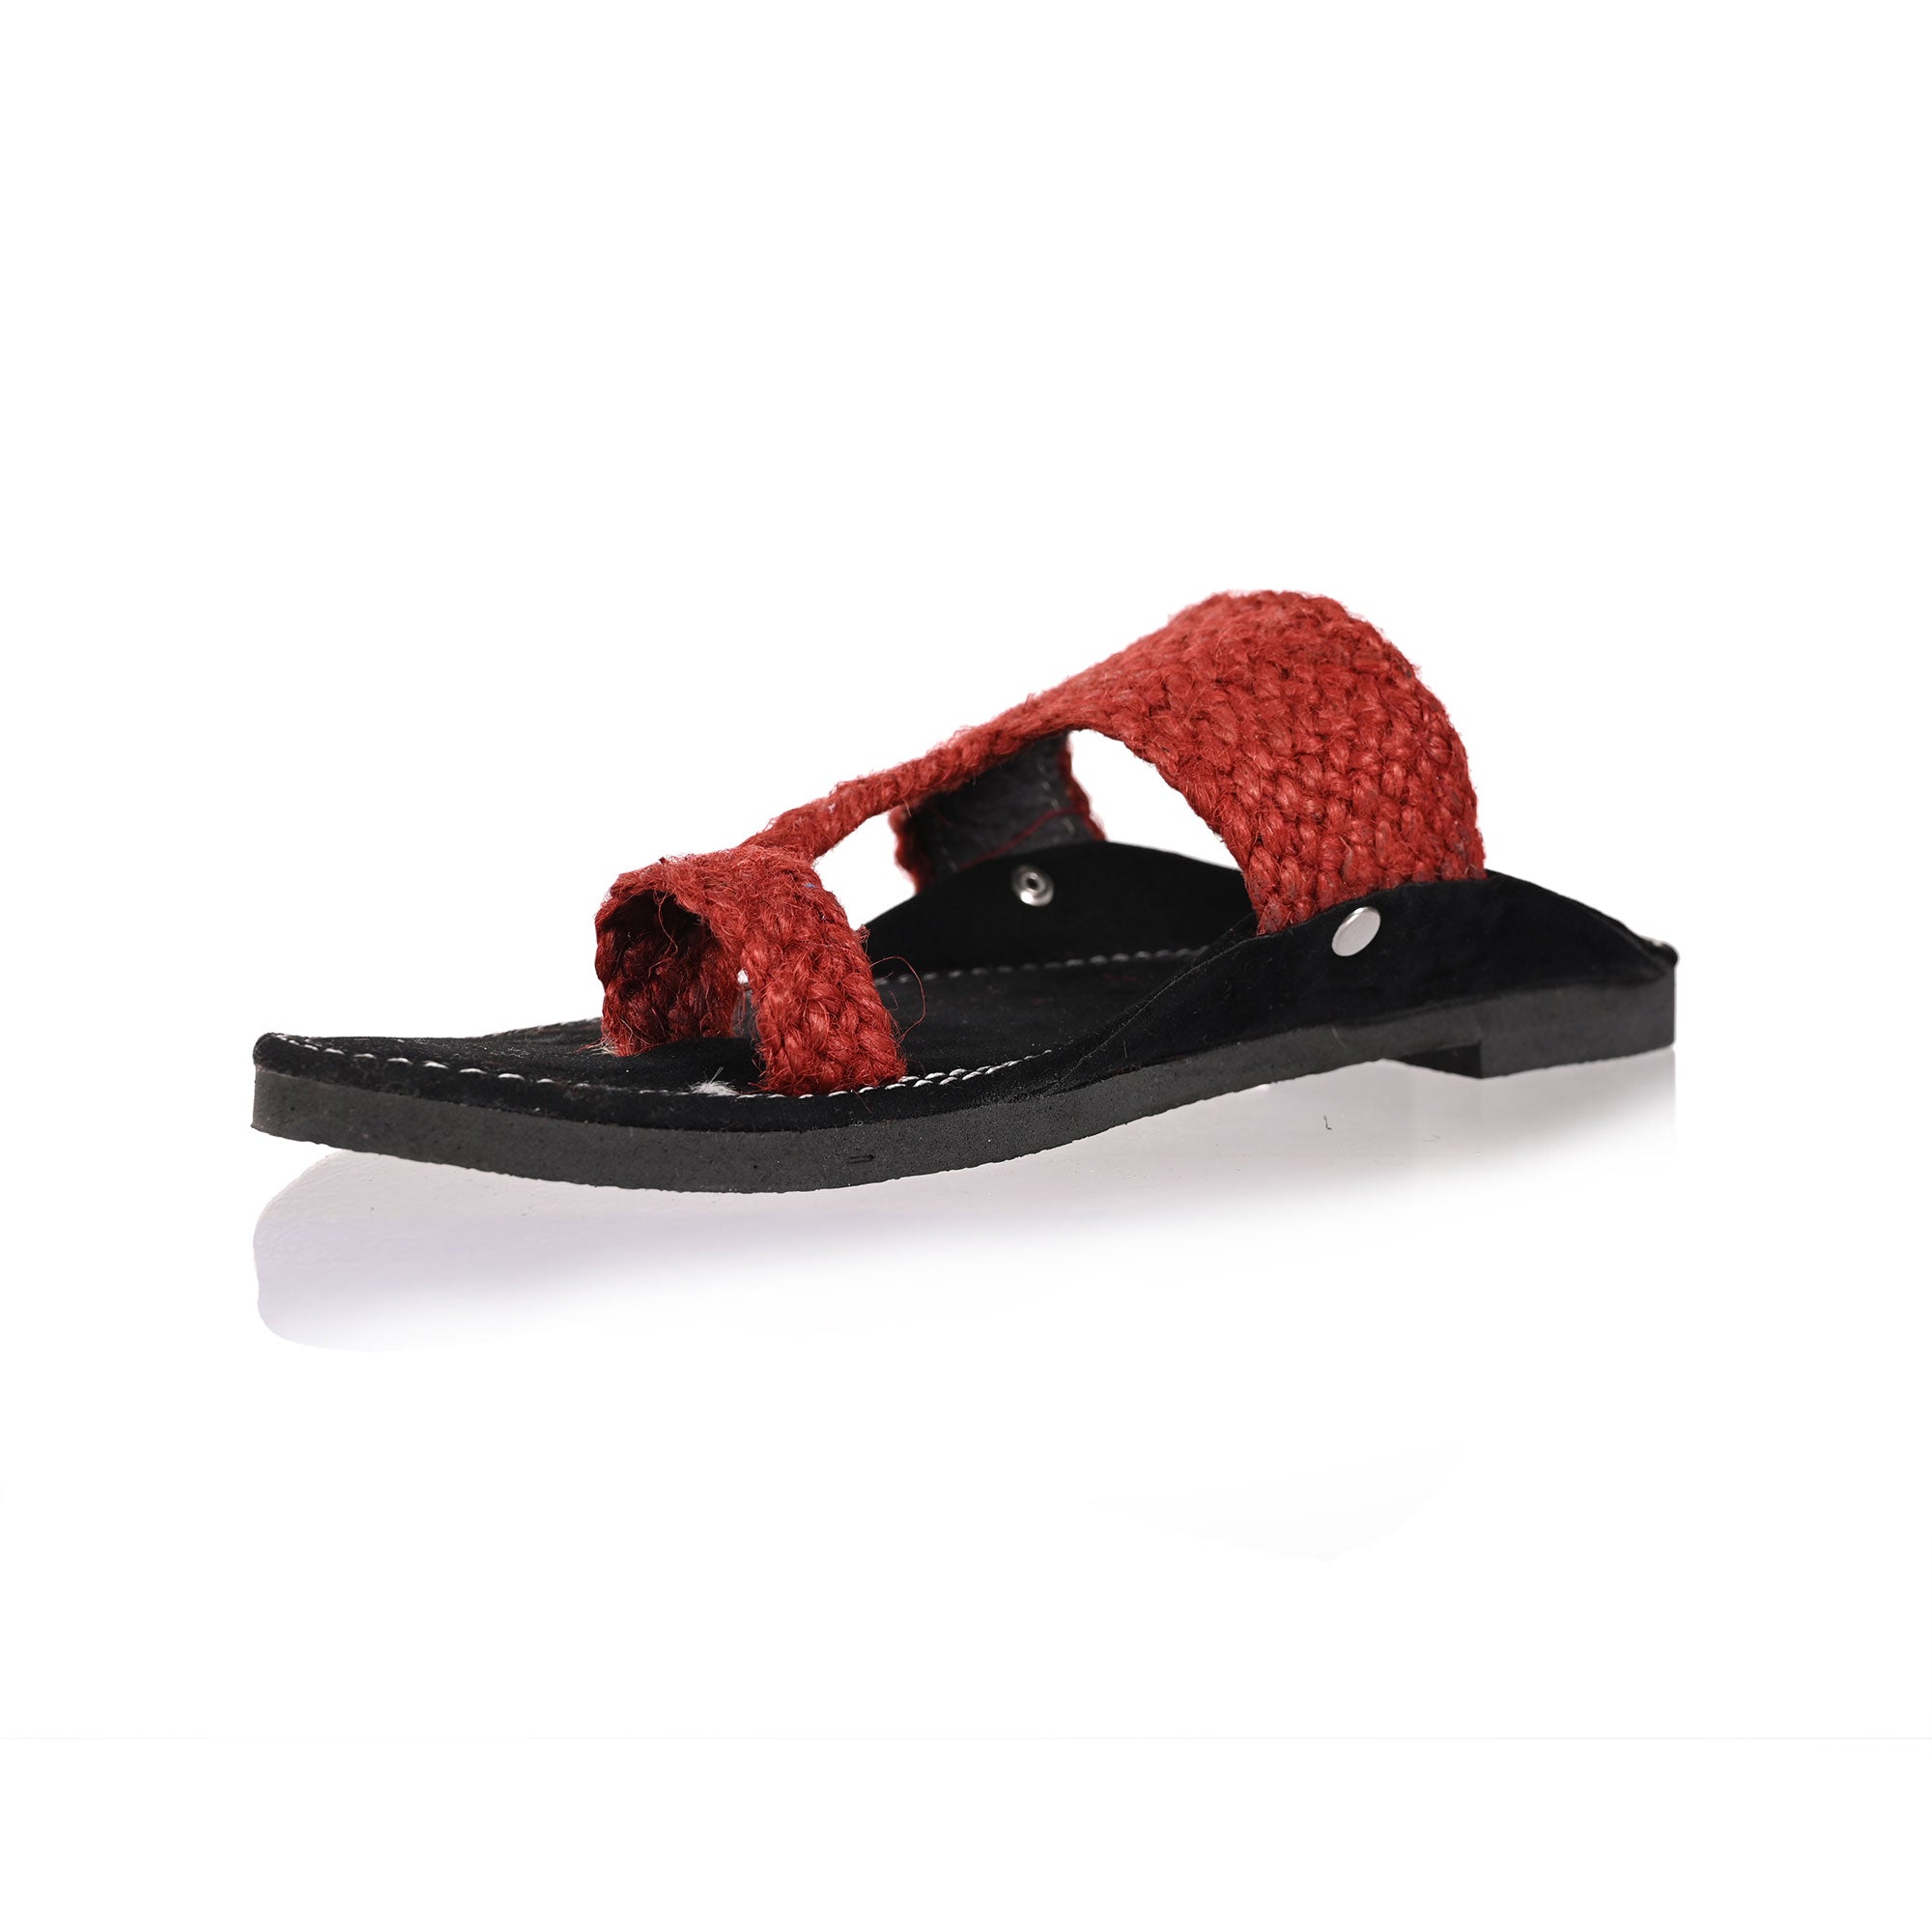 Red Jute Chappal/Slippers for Men